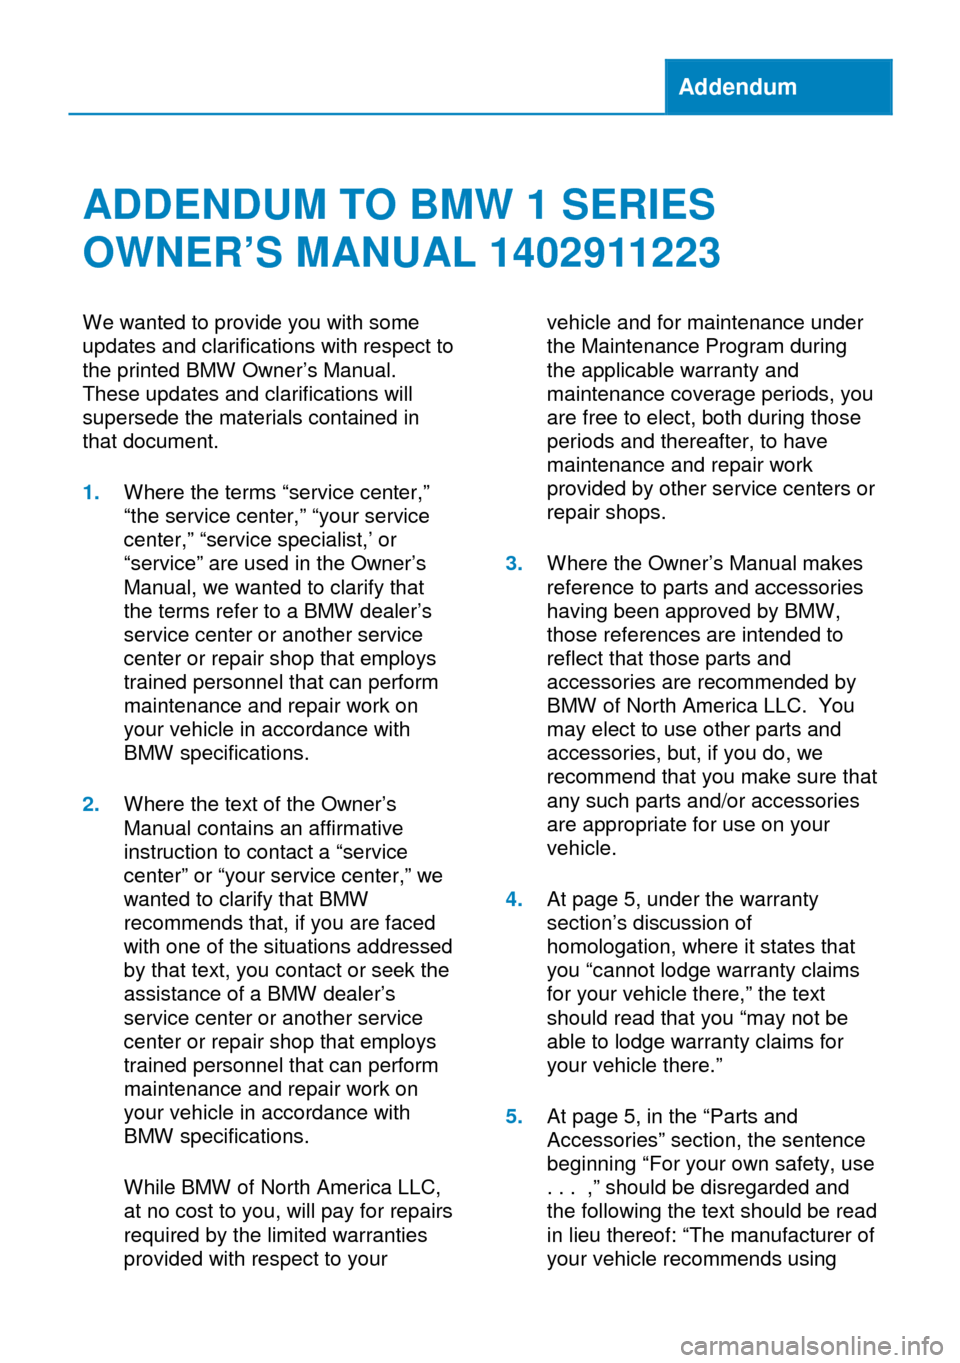 BMW 1 SERIES 2013 E82 Owners Manual Addendum
ADDENDUM TO BMW 1 SERIES
OWNER’S MANUAL 1402911223
We wanted to provide you with some
updates and clarifications with respect to
the printed BMW Owner’s Manual.
These updates and clarific